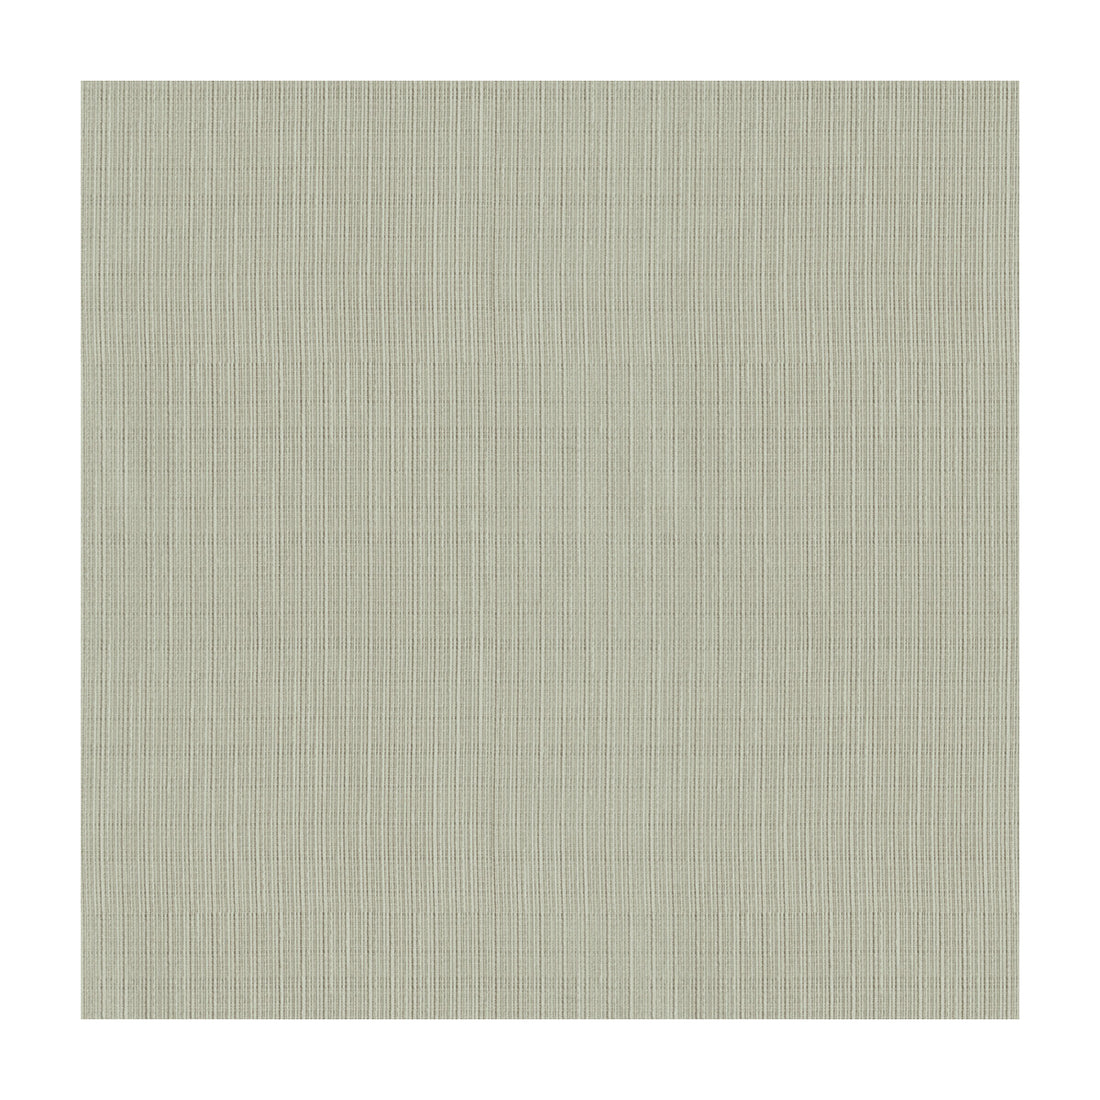 Kravet Contract fabric in 4158-11 color - pattern 4158.11.0 - by Kravet Contract